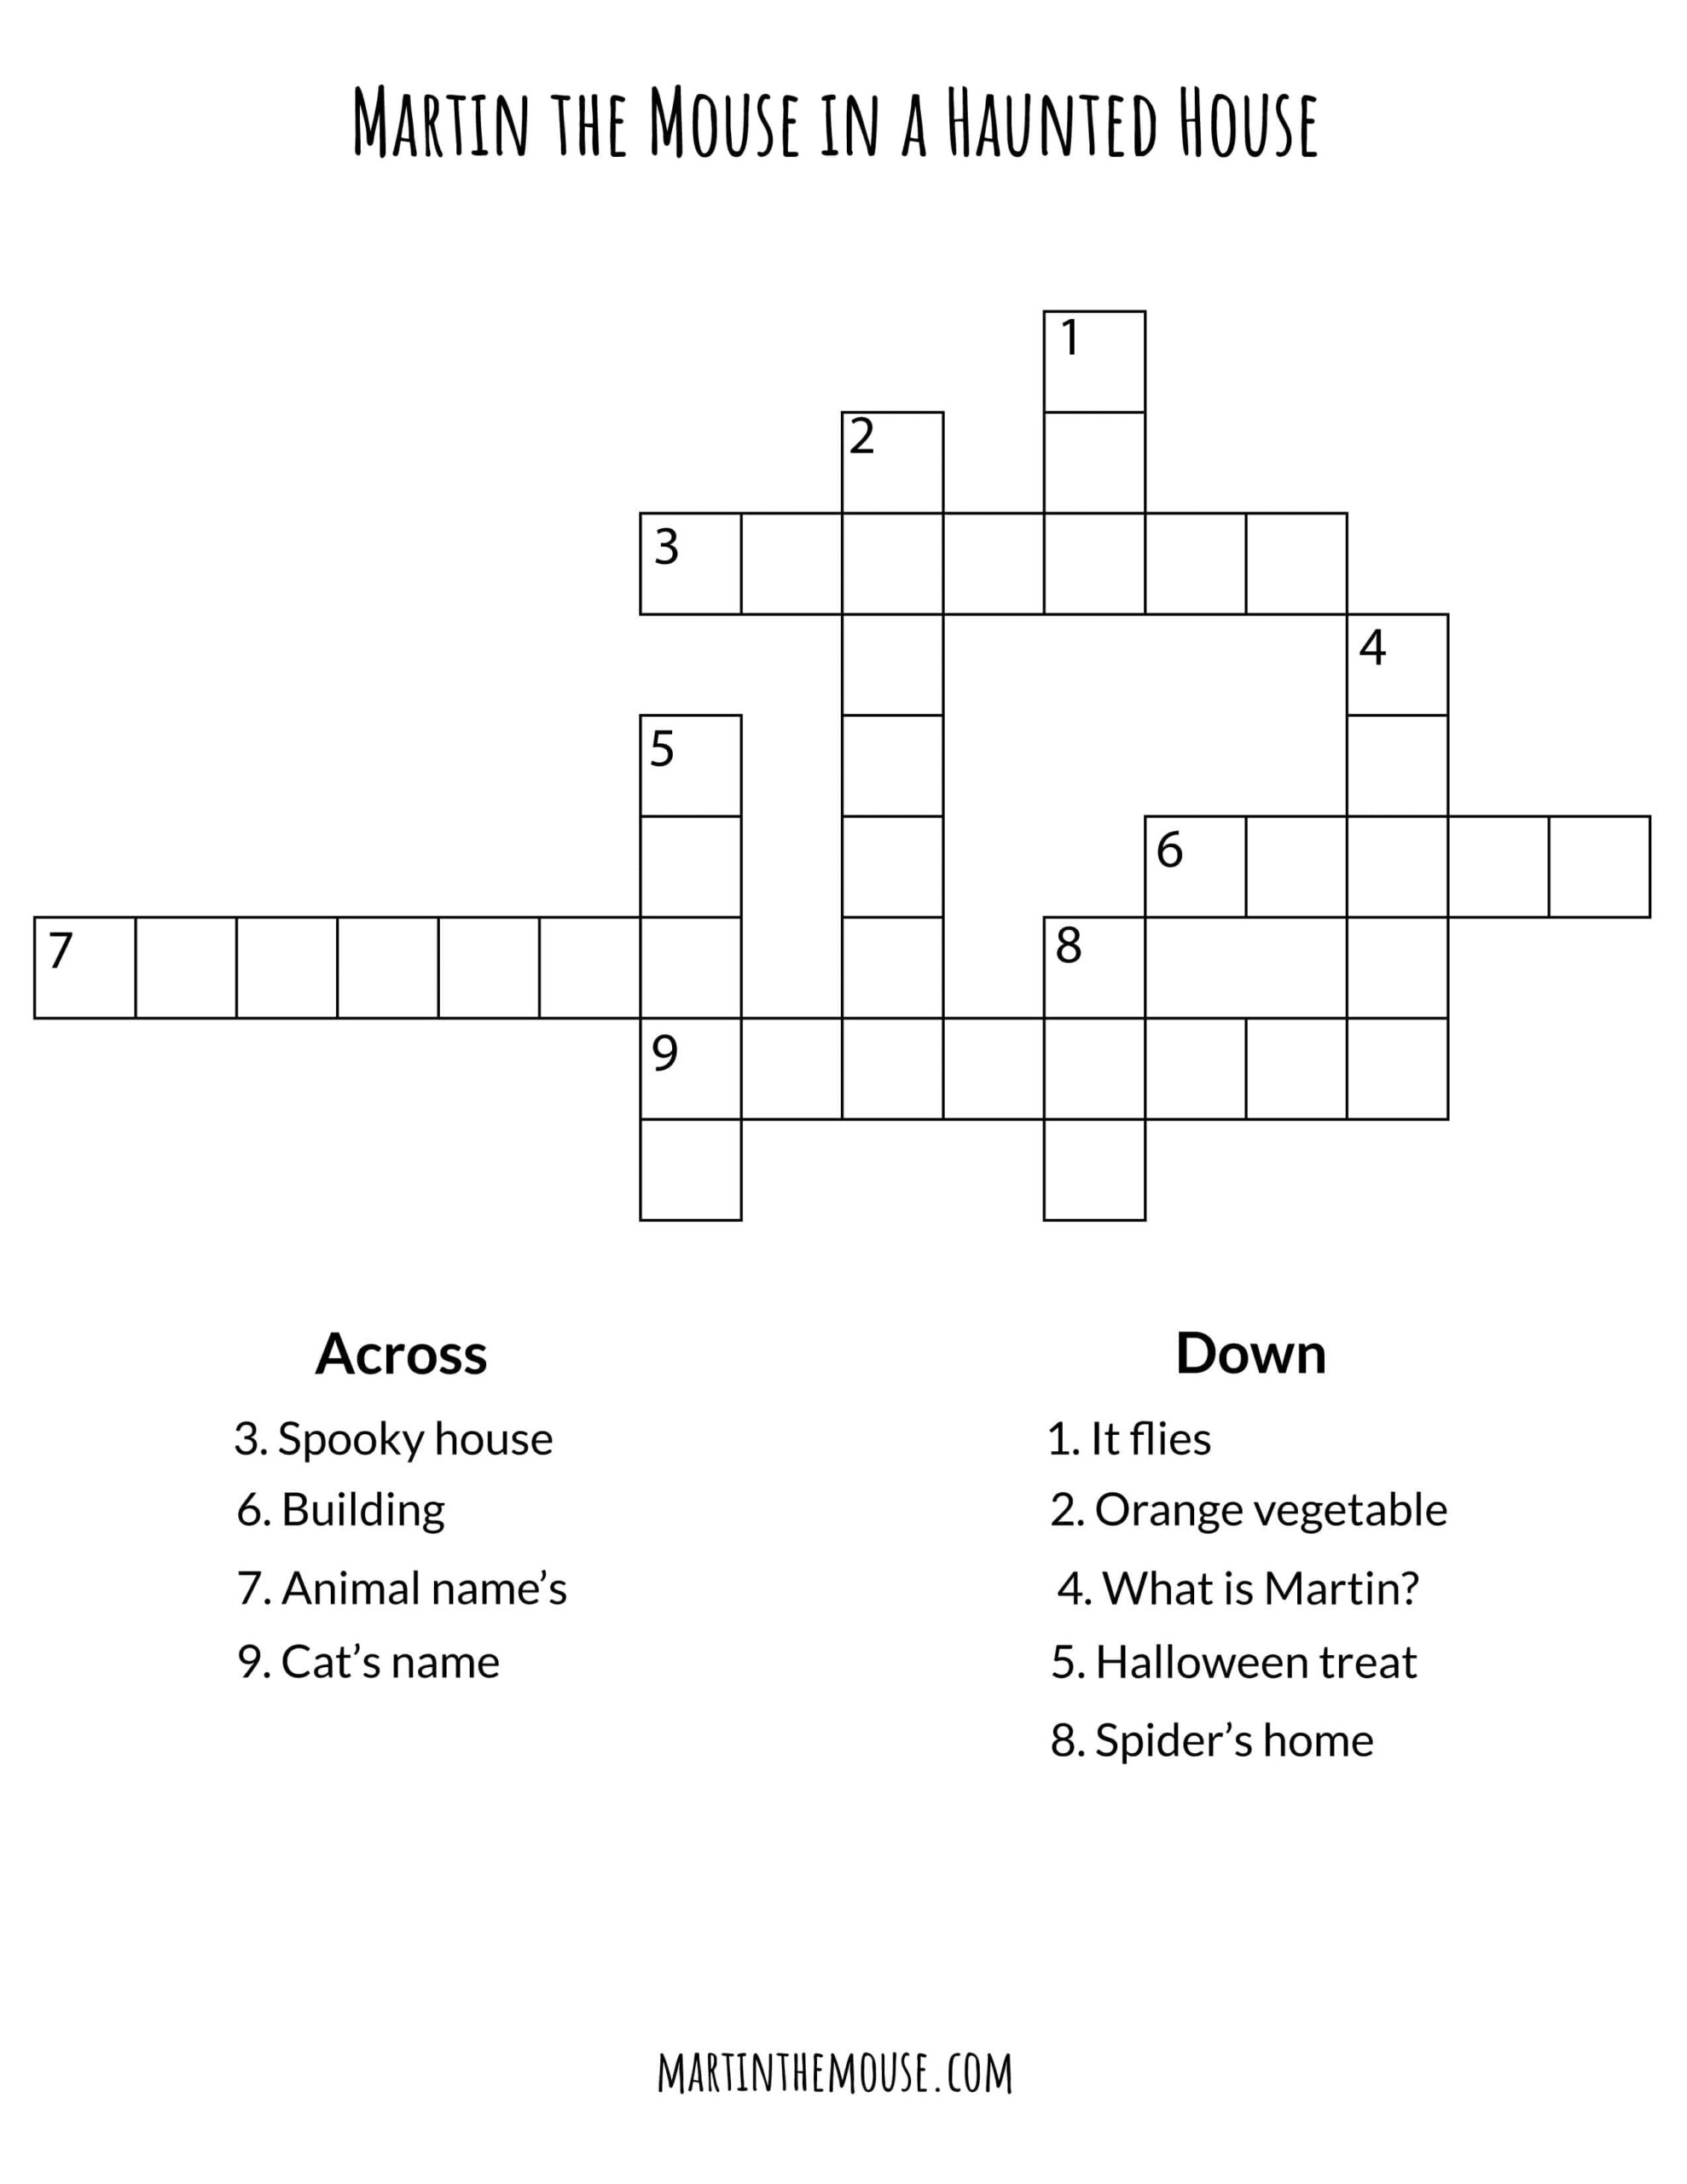 Martin The Mouse in a Haunted House Crossword Puzzle